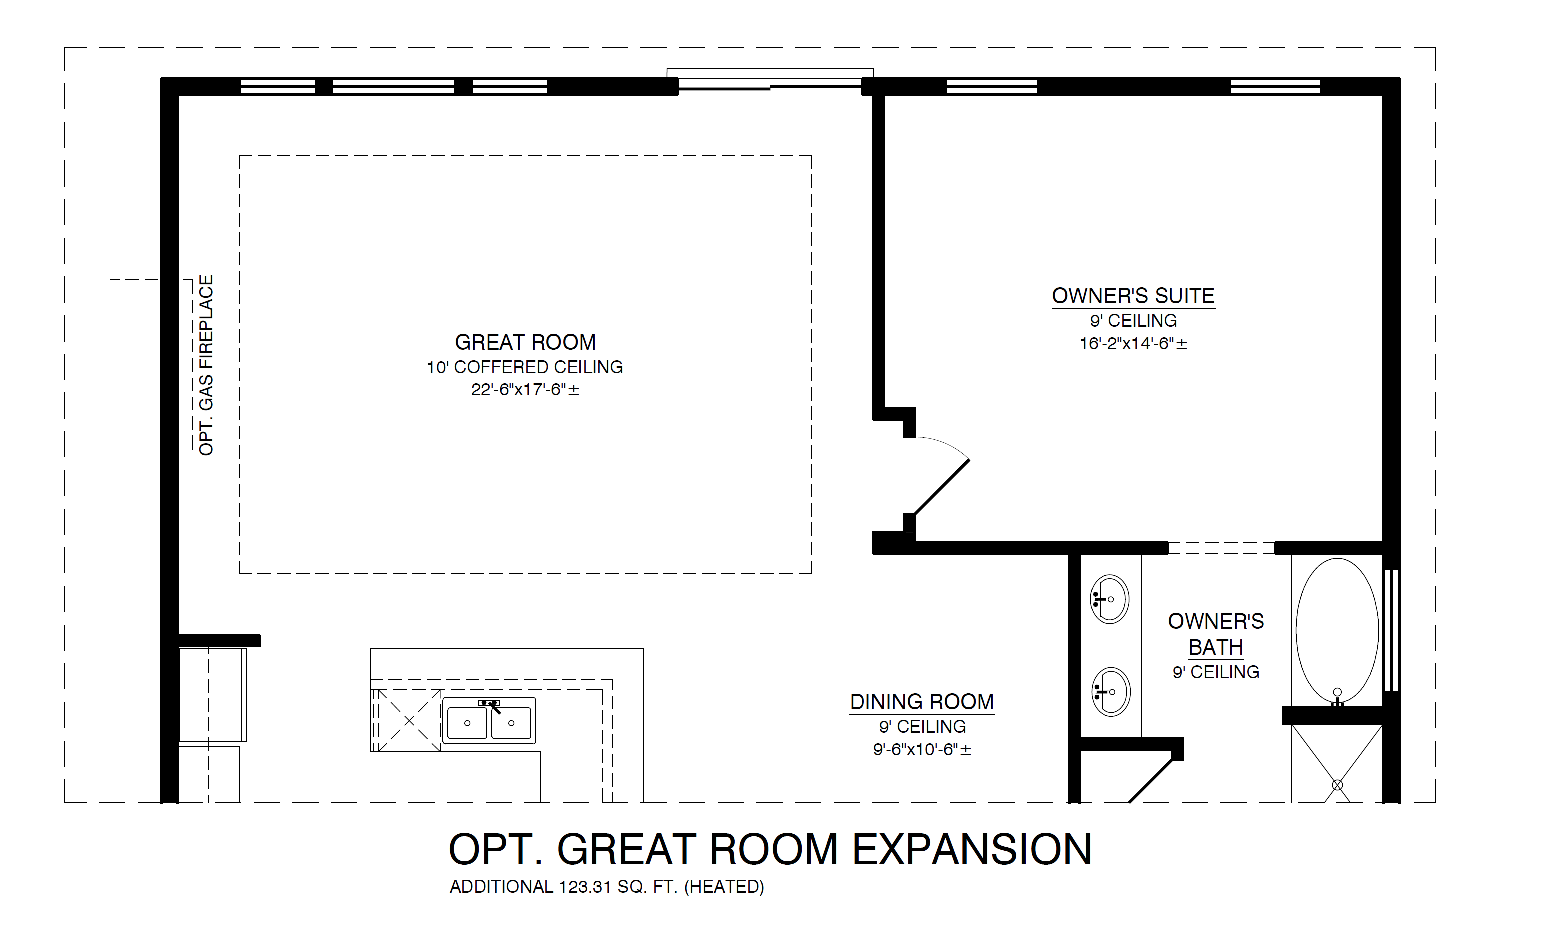 Optional Great Room Expansion